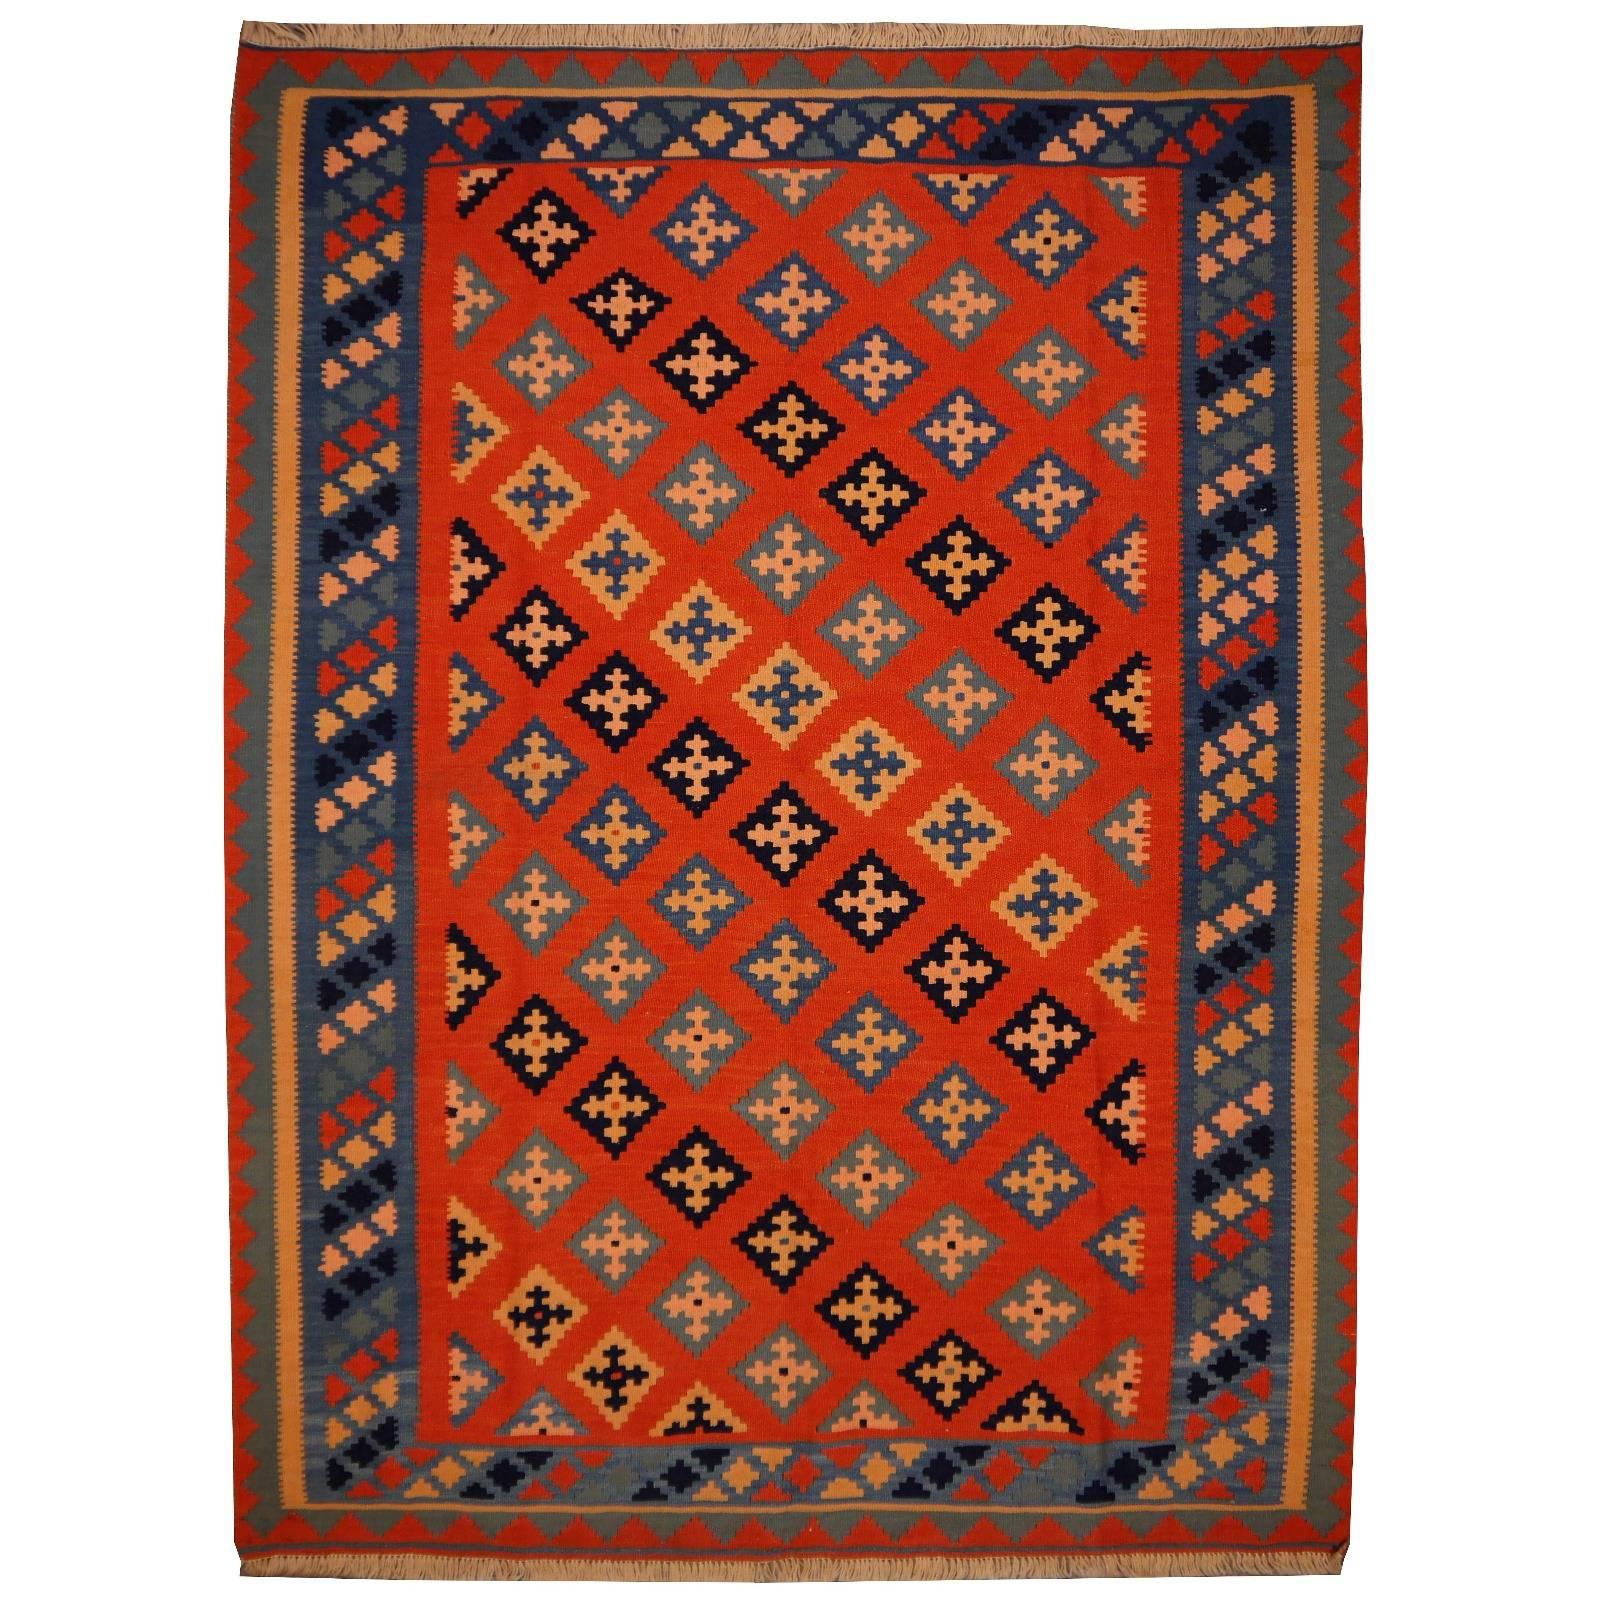 Persian Rug Kilim Handwoven with Natural Dyed Organic Wool, Vintage